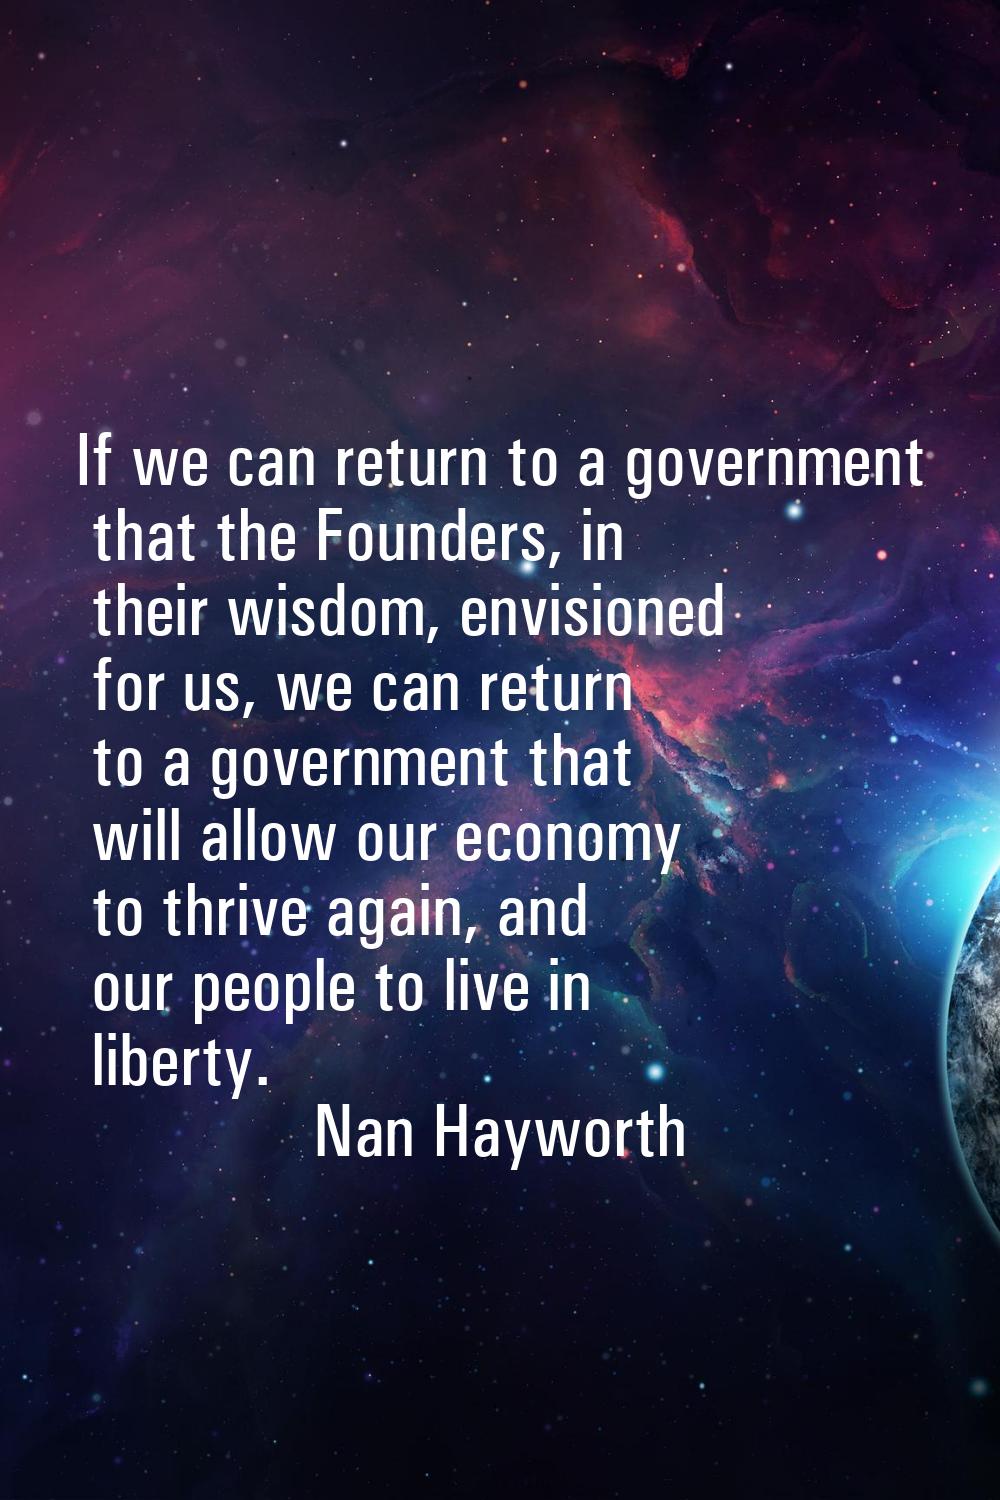 If we can return to a government that the Founders, in their wisdom, envisioned for us, we can retu